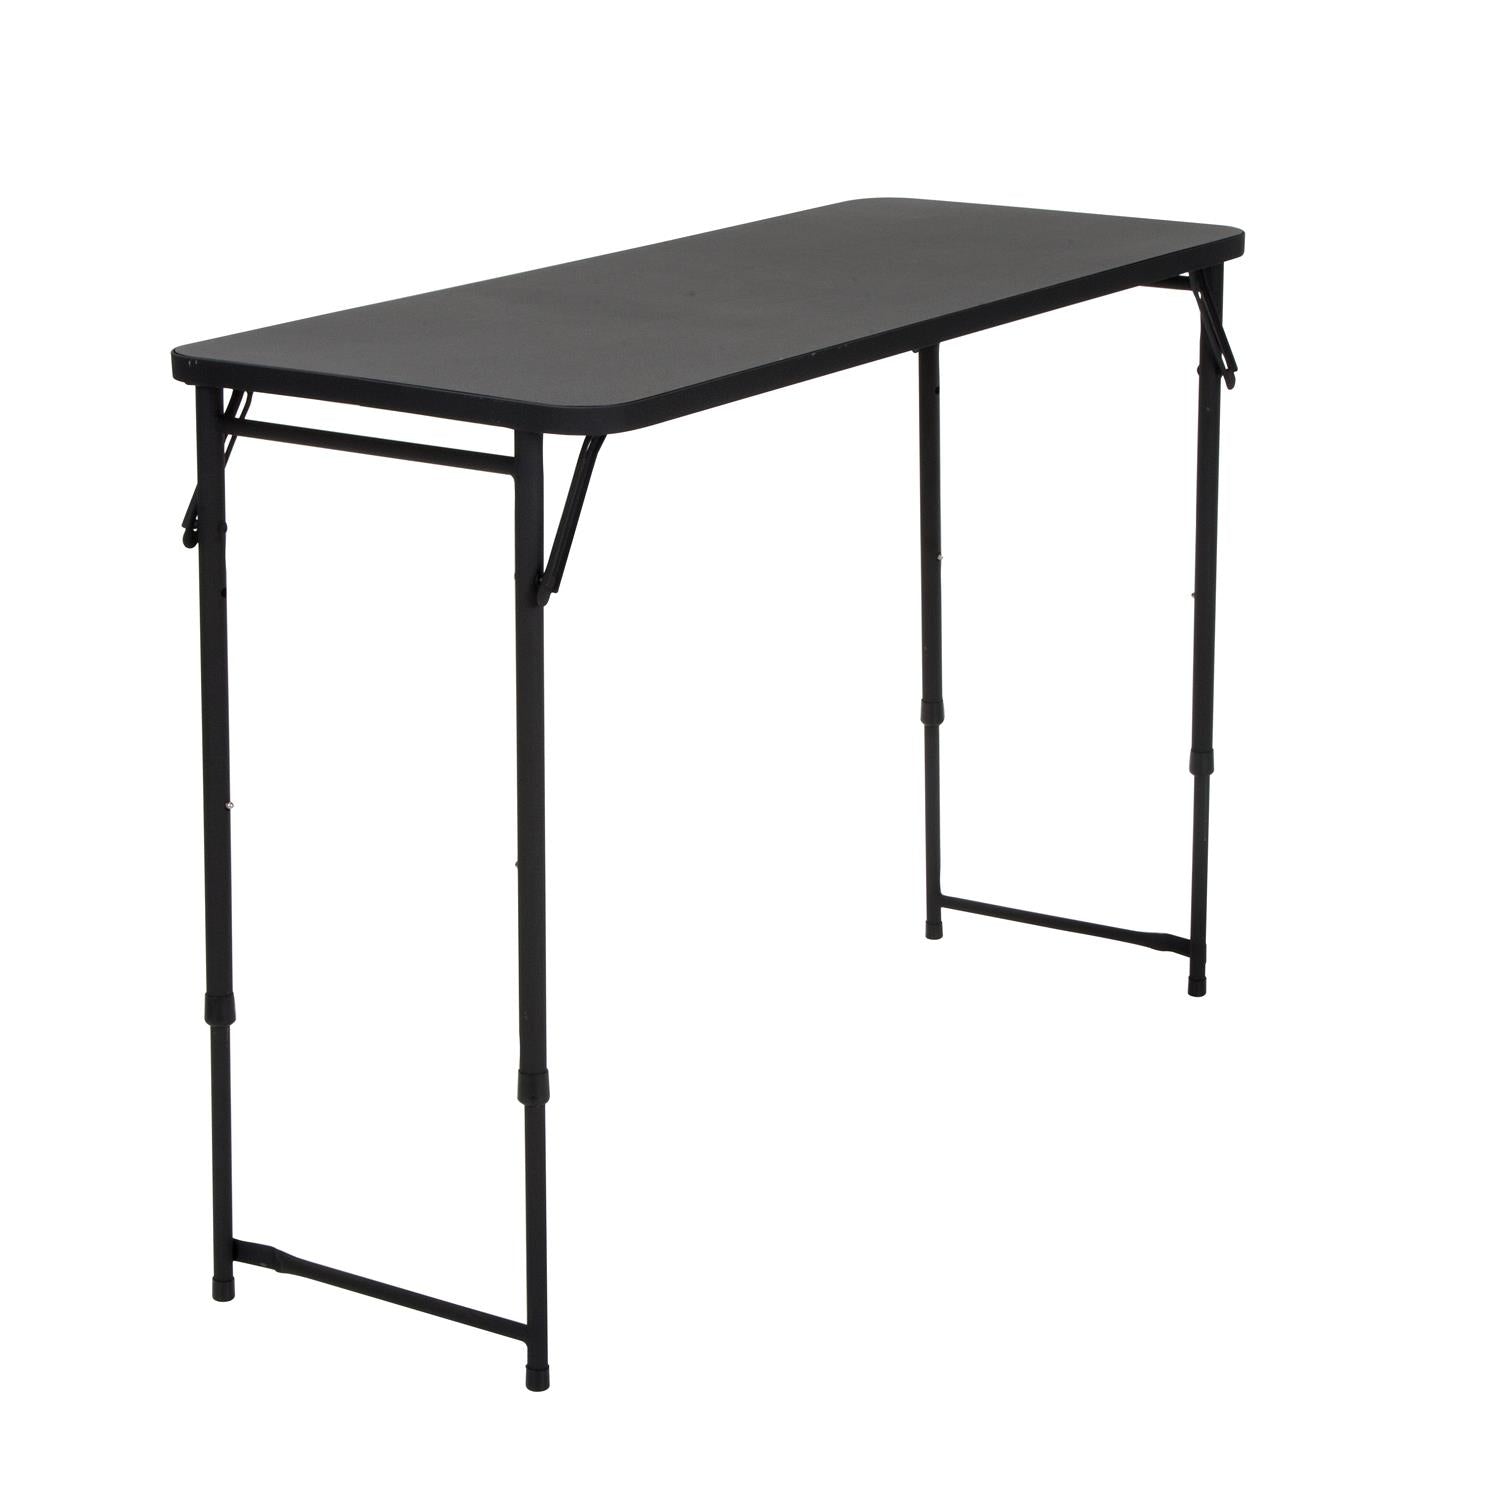 20” x 48” Adjustable Height PVC Top Table - Black - N/A